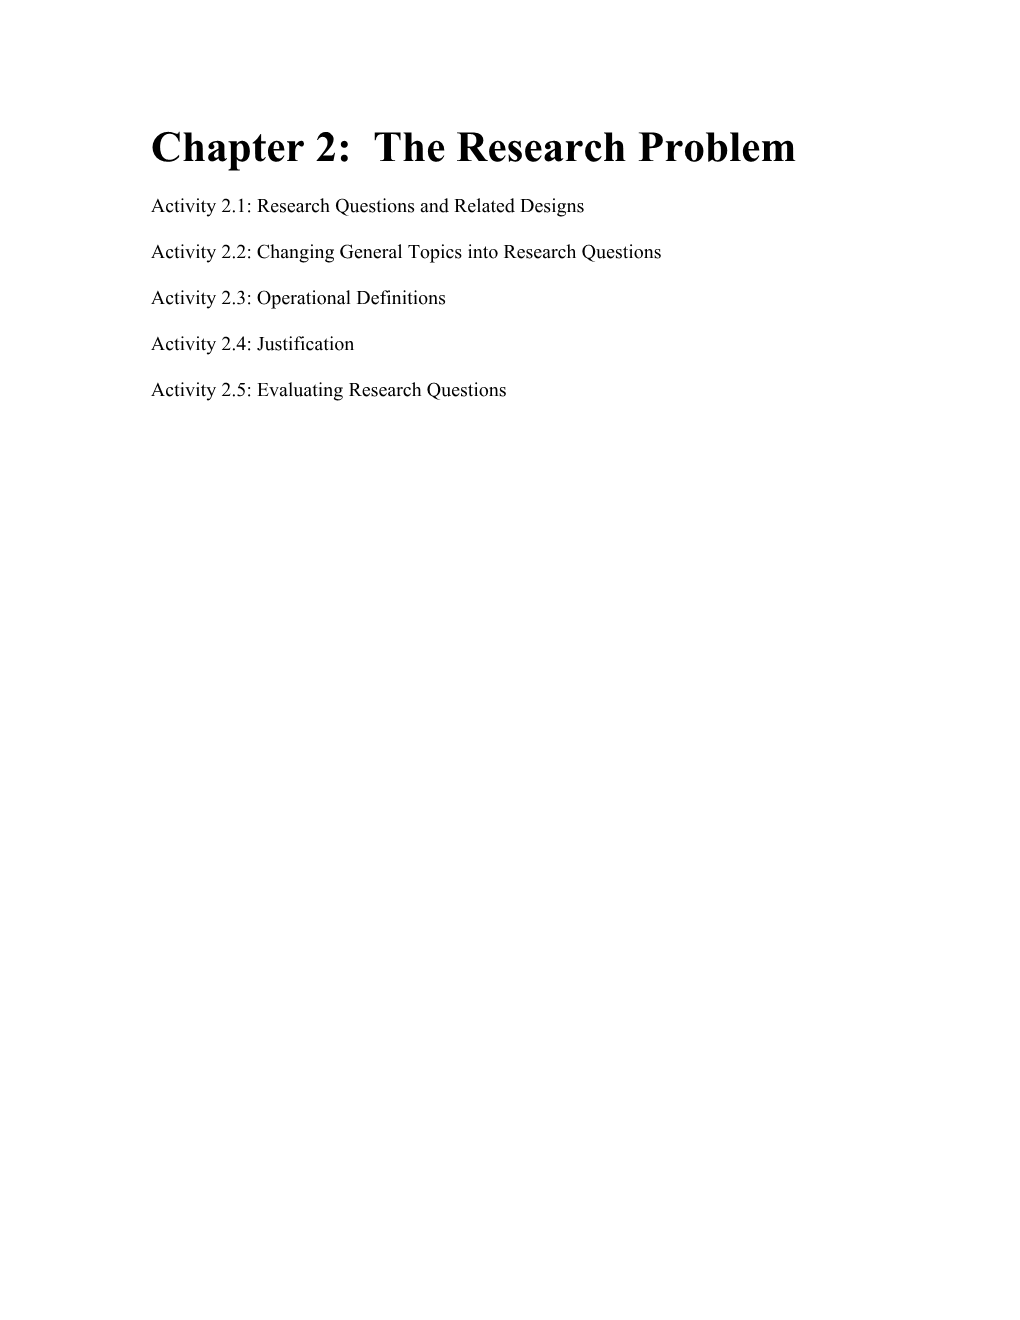 CHAPTER 2: the Research Problem